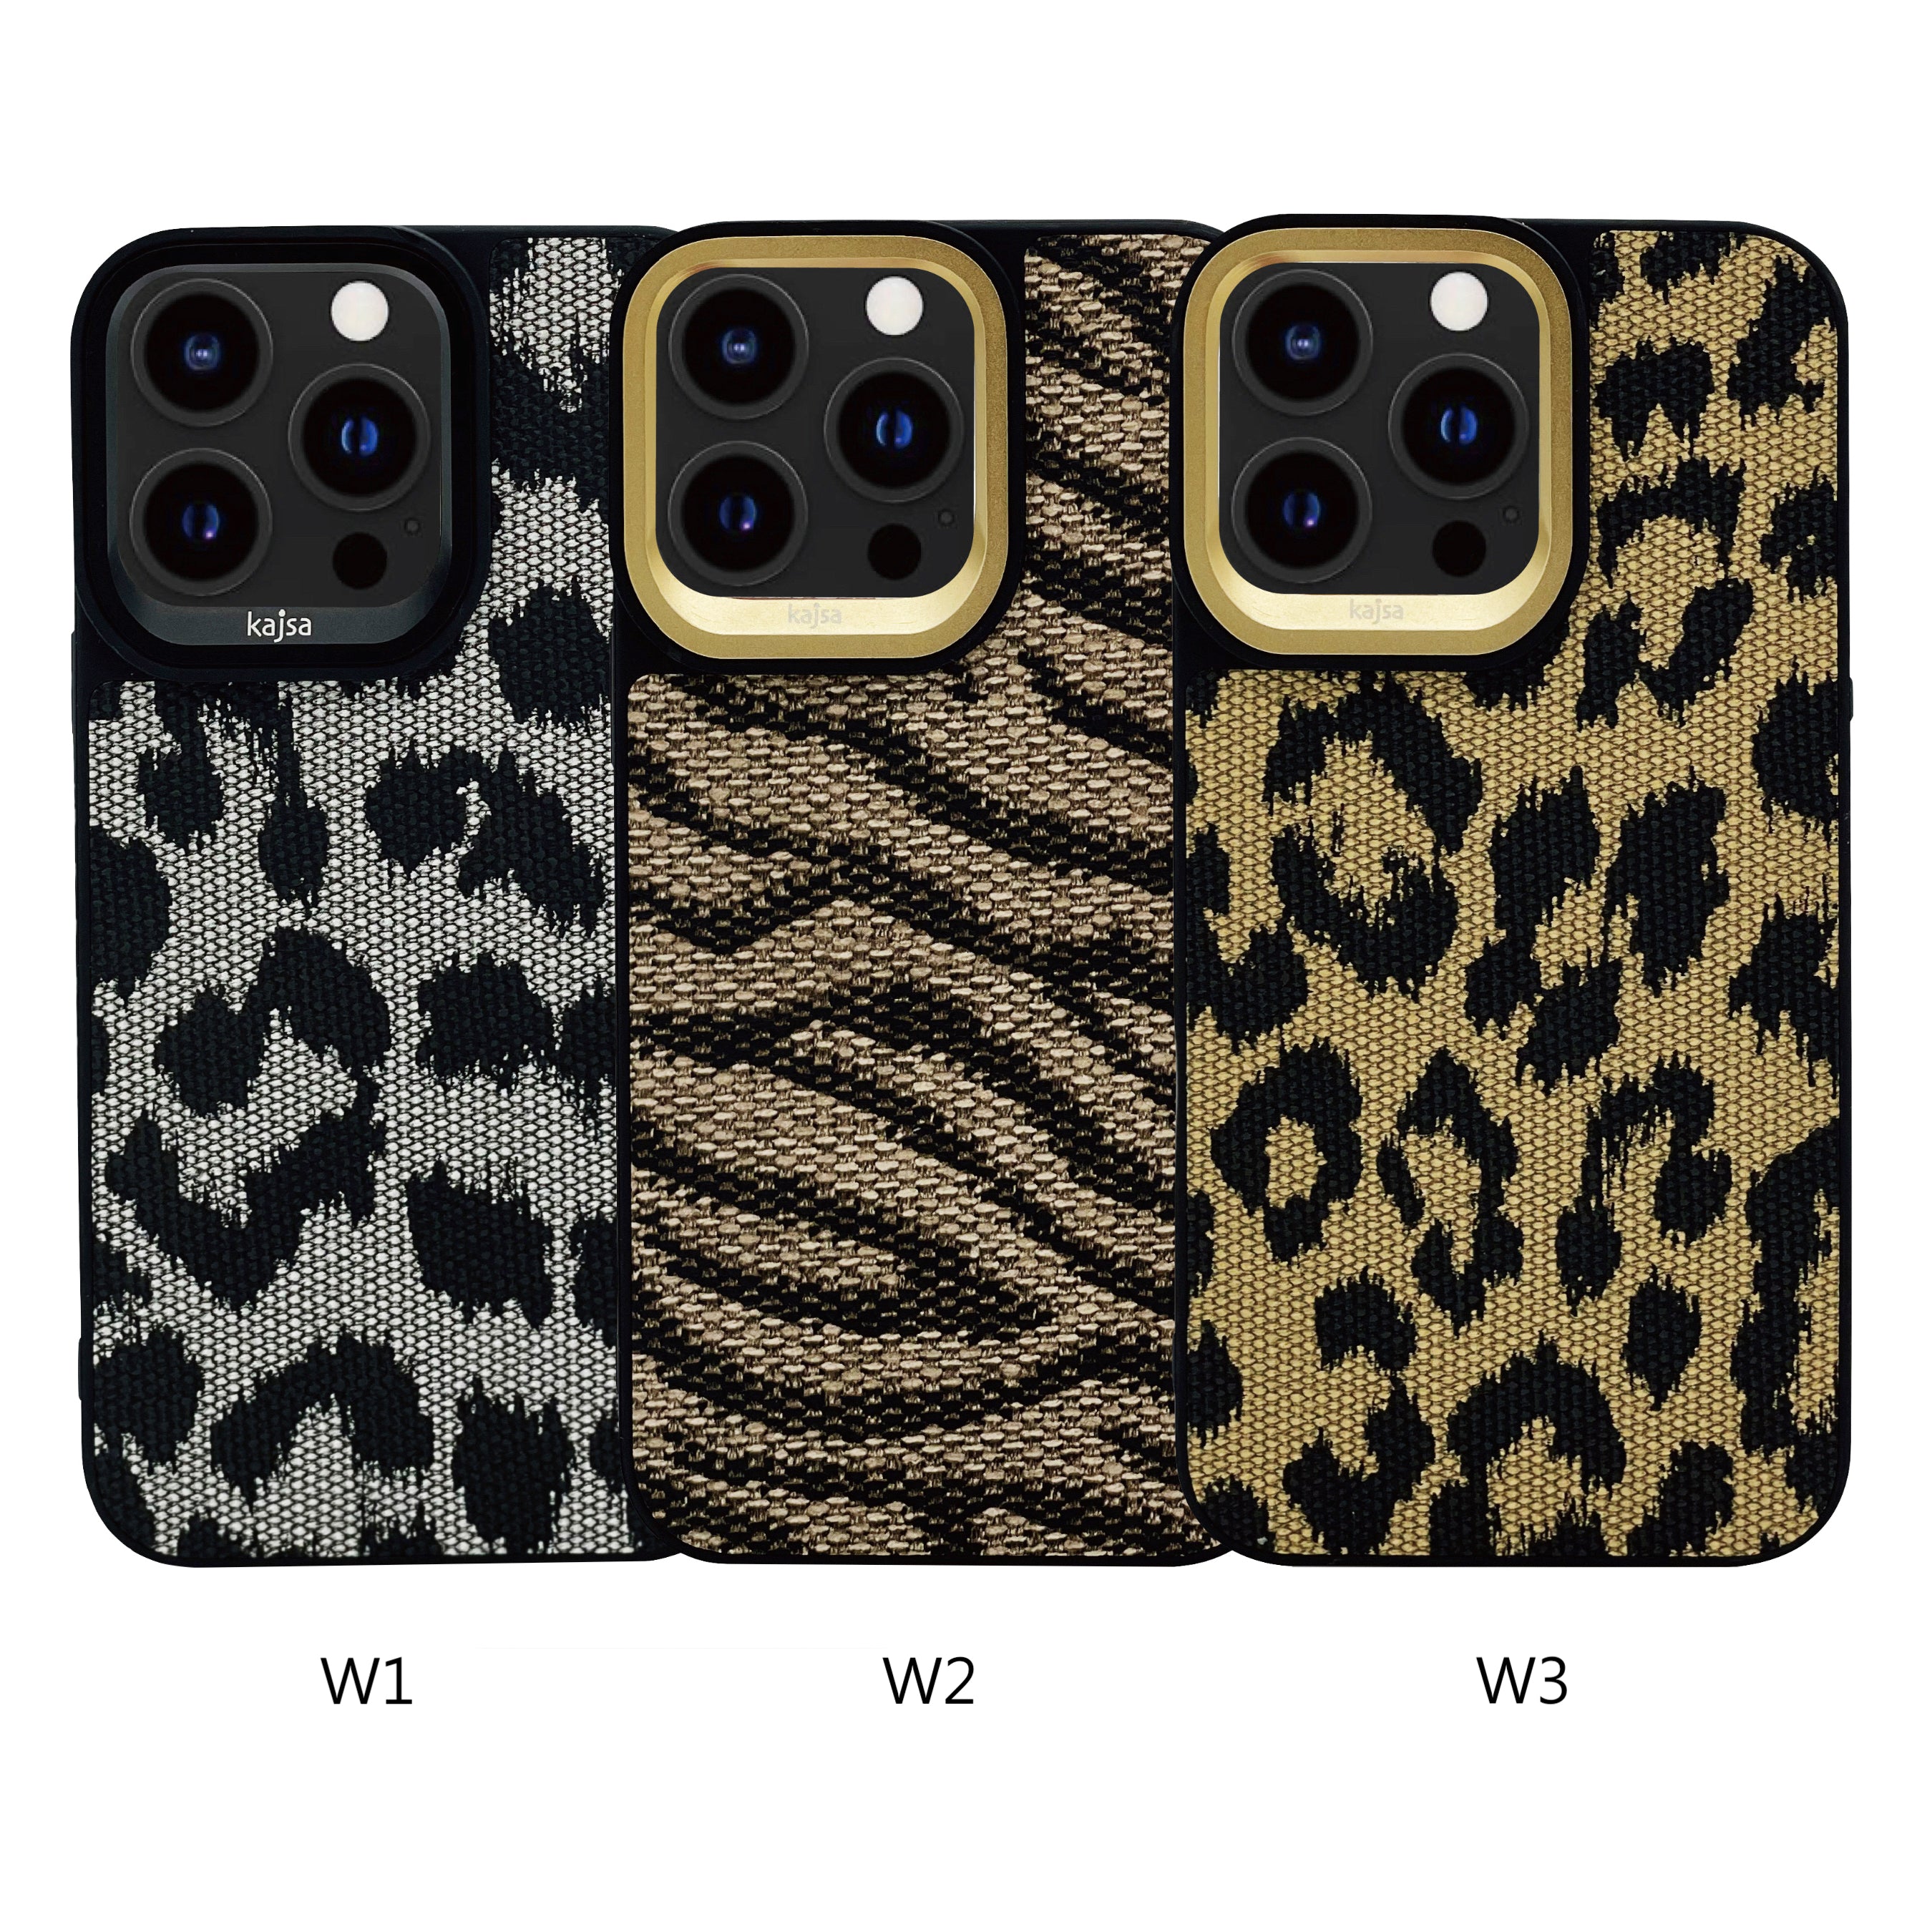 Glamorous Collection - Wild III Back Case for iPhone 14-Phone Case- phone case - phone cases- phone cover- iphone cover- iphone case- iphone cases- leather case- leather cases- DIYCASE - custom case - leather cover - hand strap case - croco pattern case - snake pattern case - carbon fiber phone case - phone case brand - unique phone case - high quality - phone case brand - protective case - buy phone case hong kong - online buy phone case - iphone‎手機殼 - 客製化手機殼 - samsung ‎手機殼 - 香港手機殼 - 買電話殼